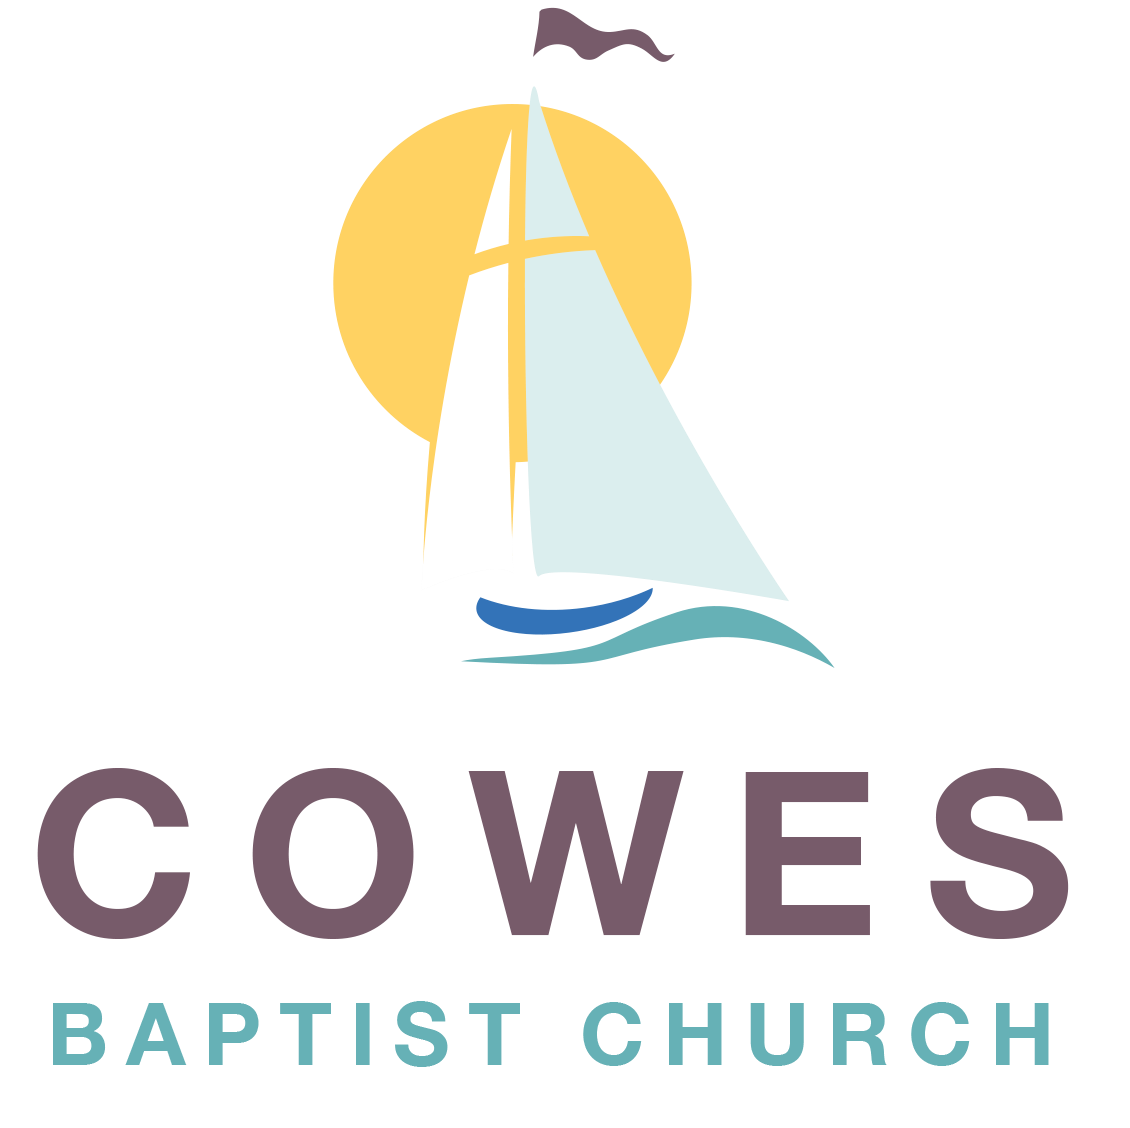 Cowes Baptist Church is a fellowship made up of people of all ages, walks of life and backgrounds.